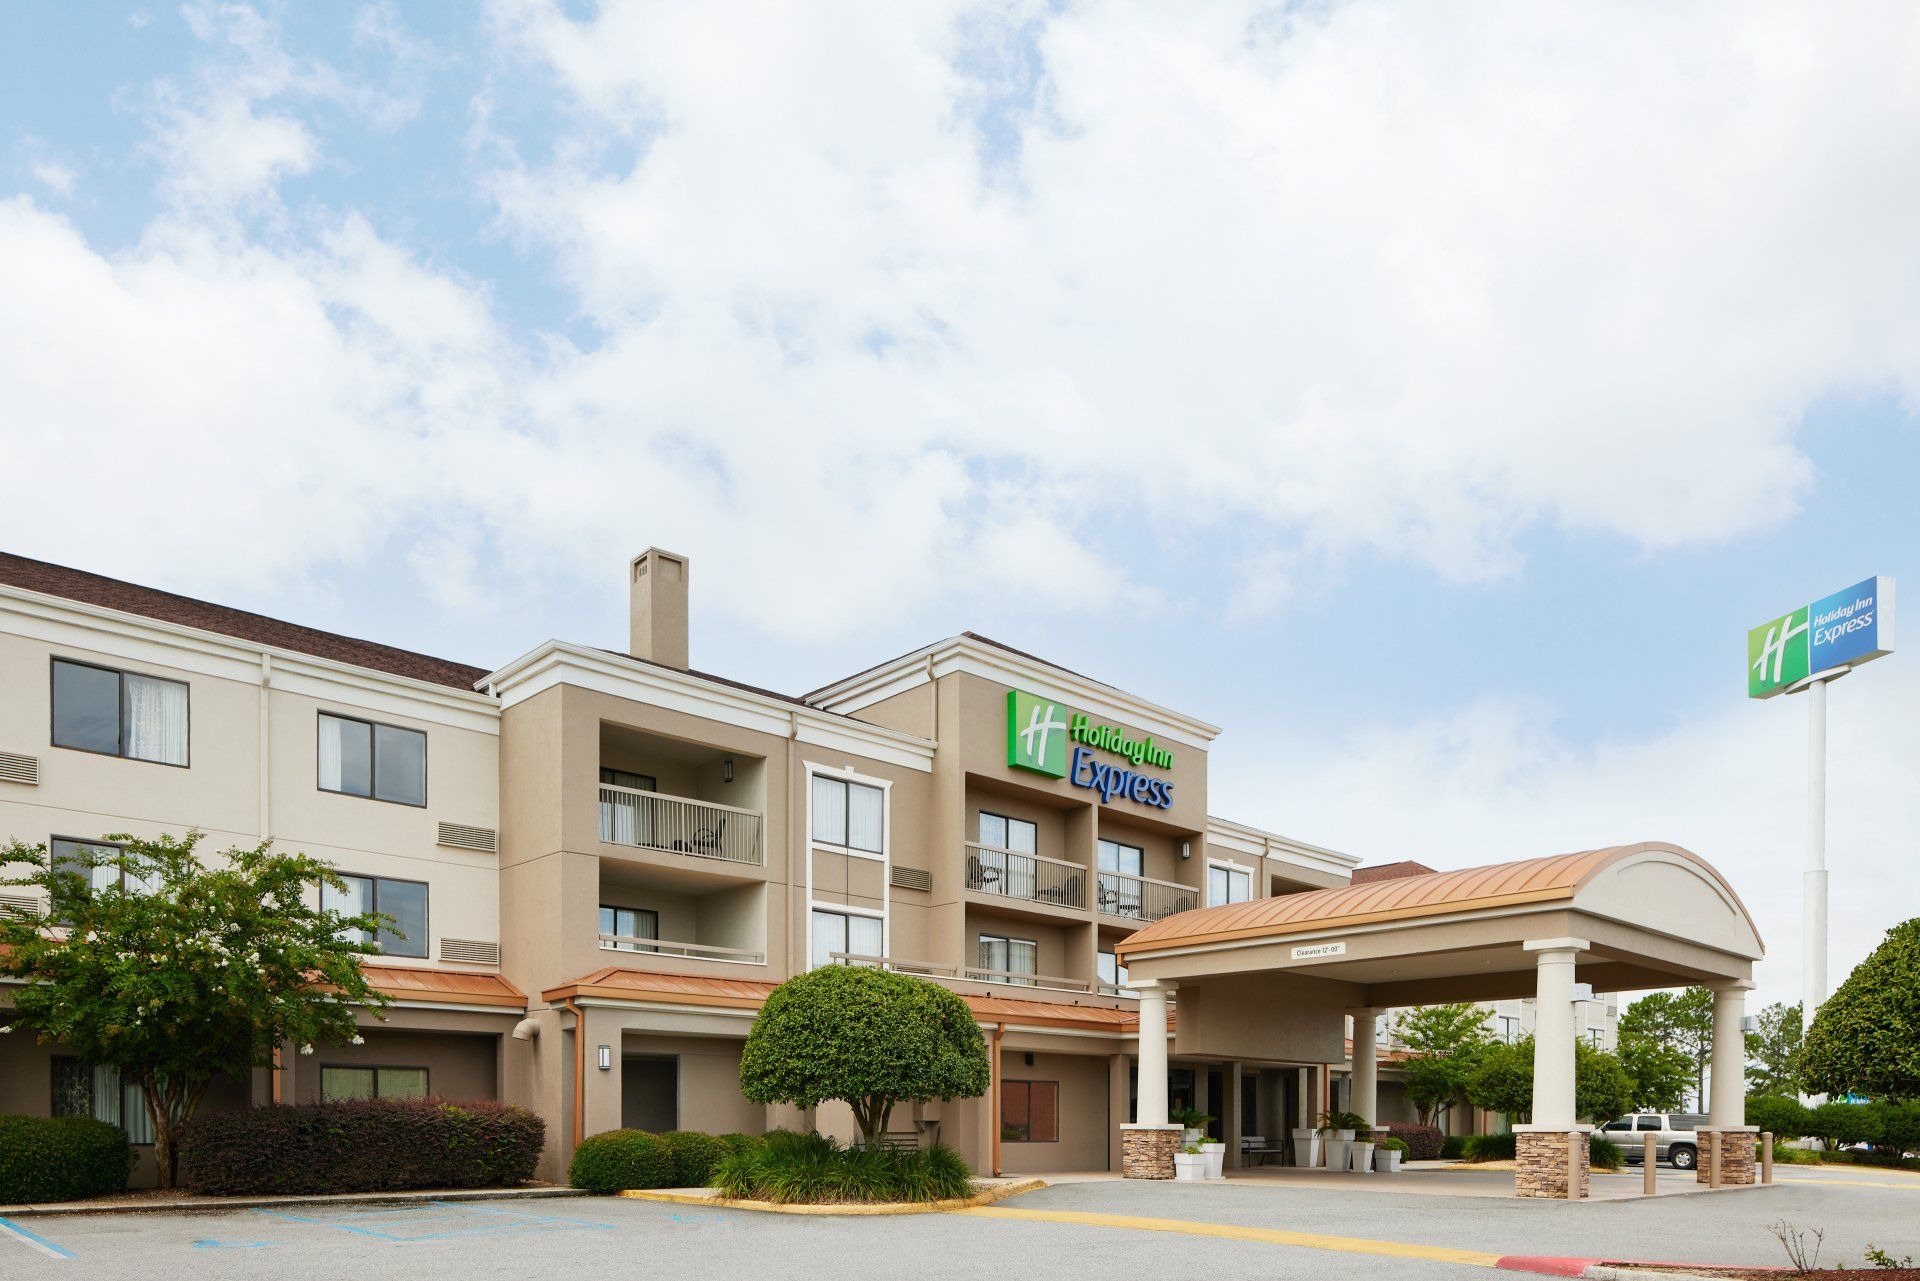 Exterior of the Holiday Inn Express owned by Williams Hotel Group in Tifton, GA.